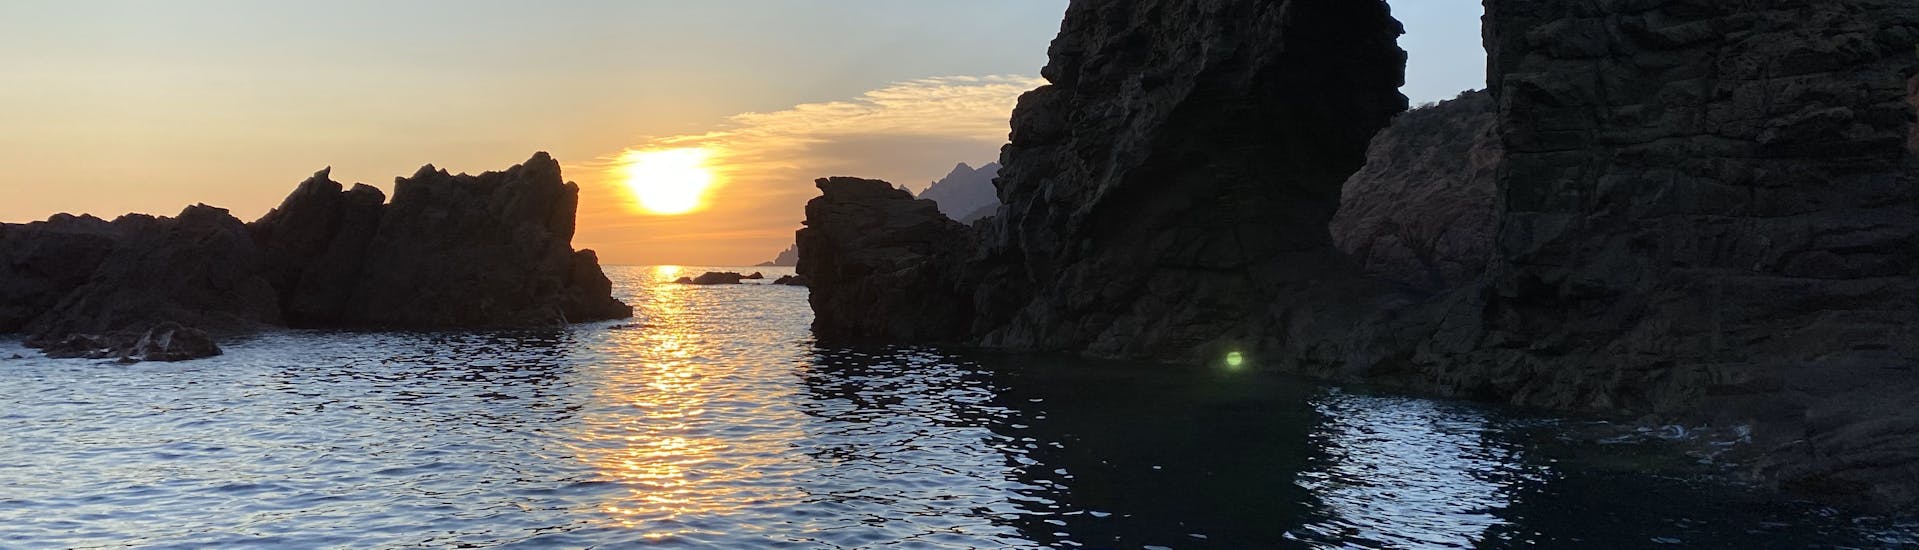 Landscape of the reefs of the gulf of Porto with a beautiful sunrise on the horizon during Private Boat Trip around the Gulf of Porto with Snorkeling, Towed Buoy and Local Lunch by Avventu Event's Porto.